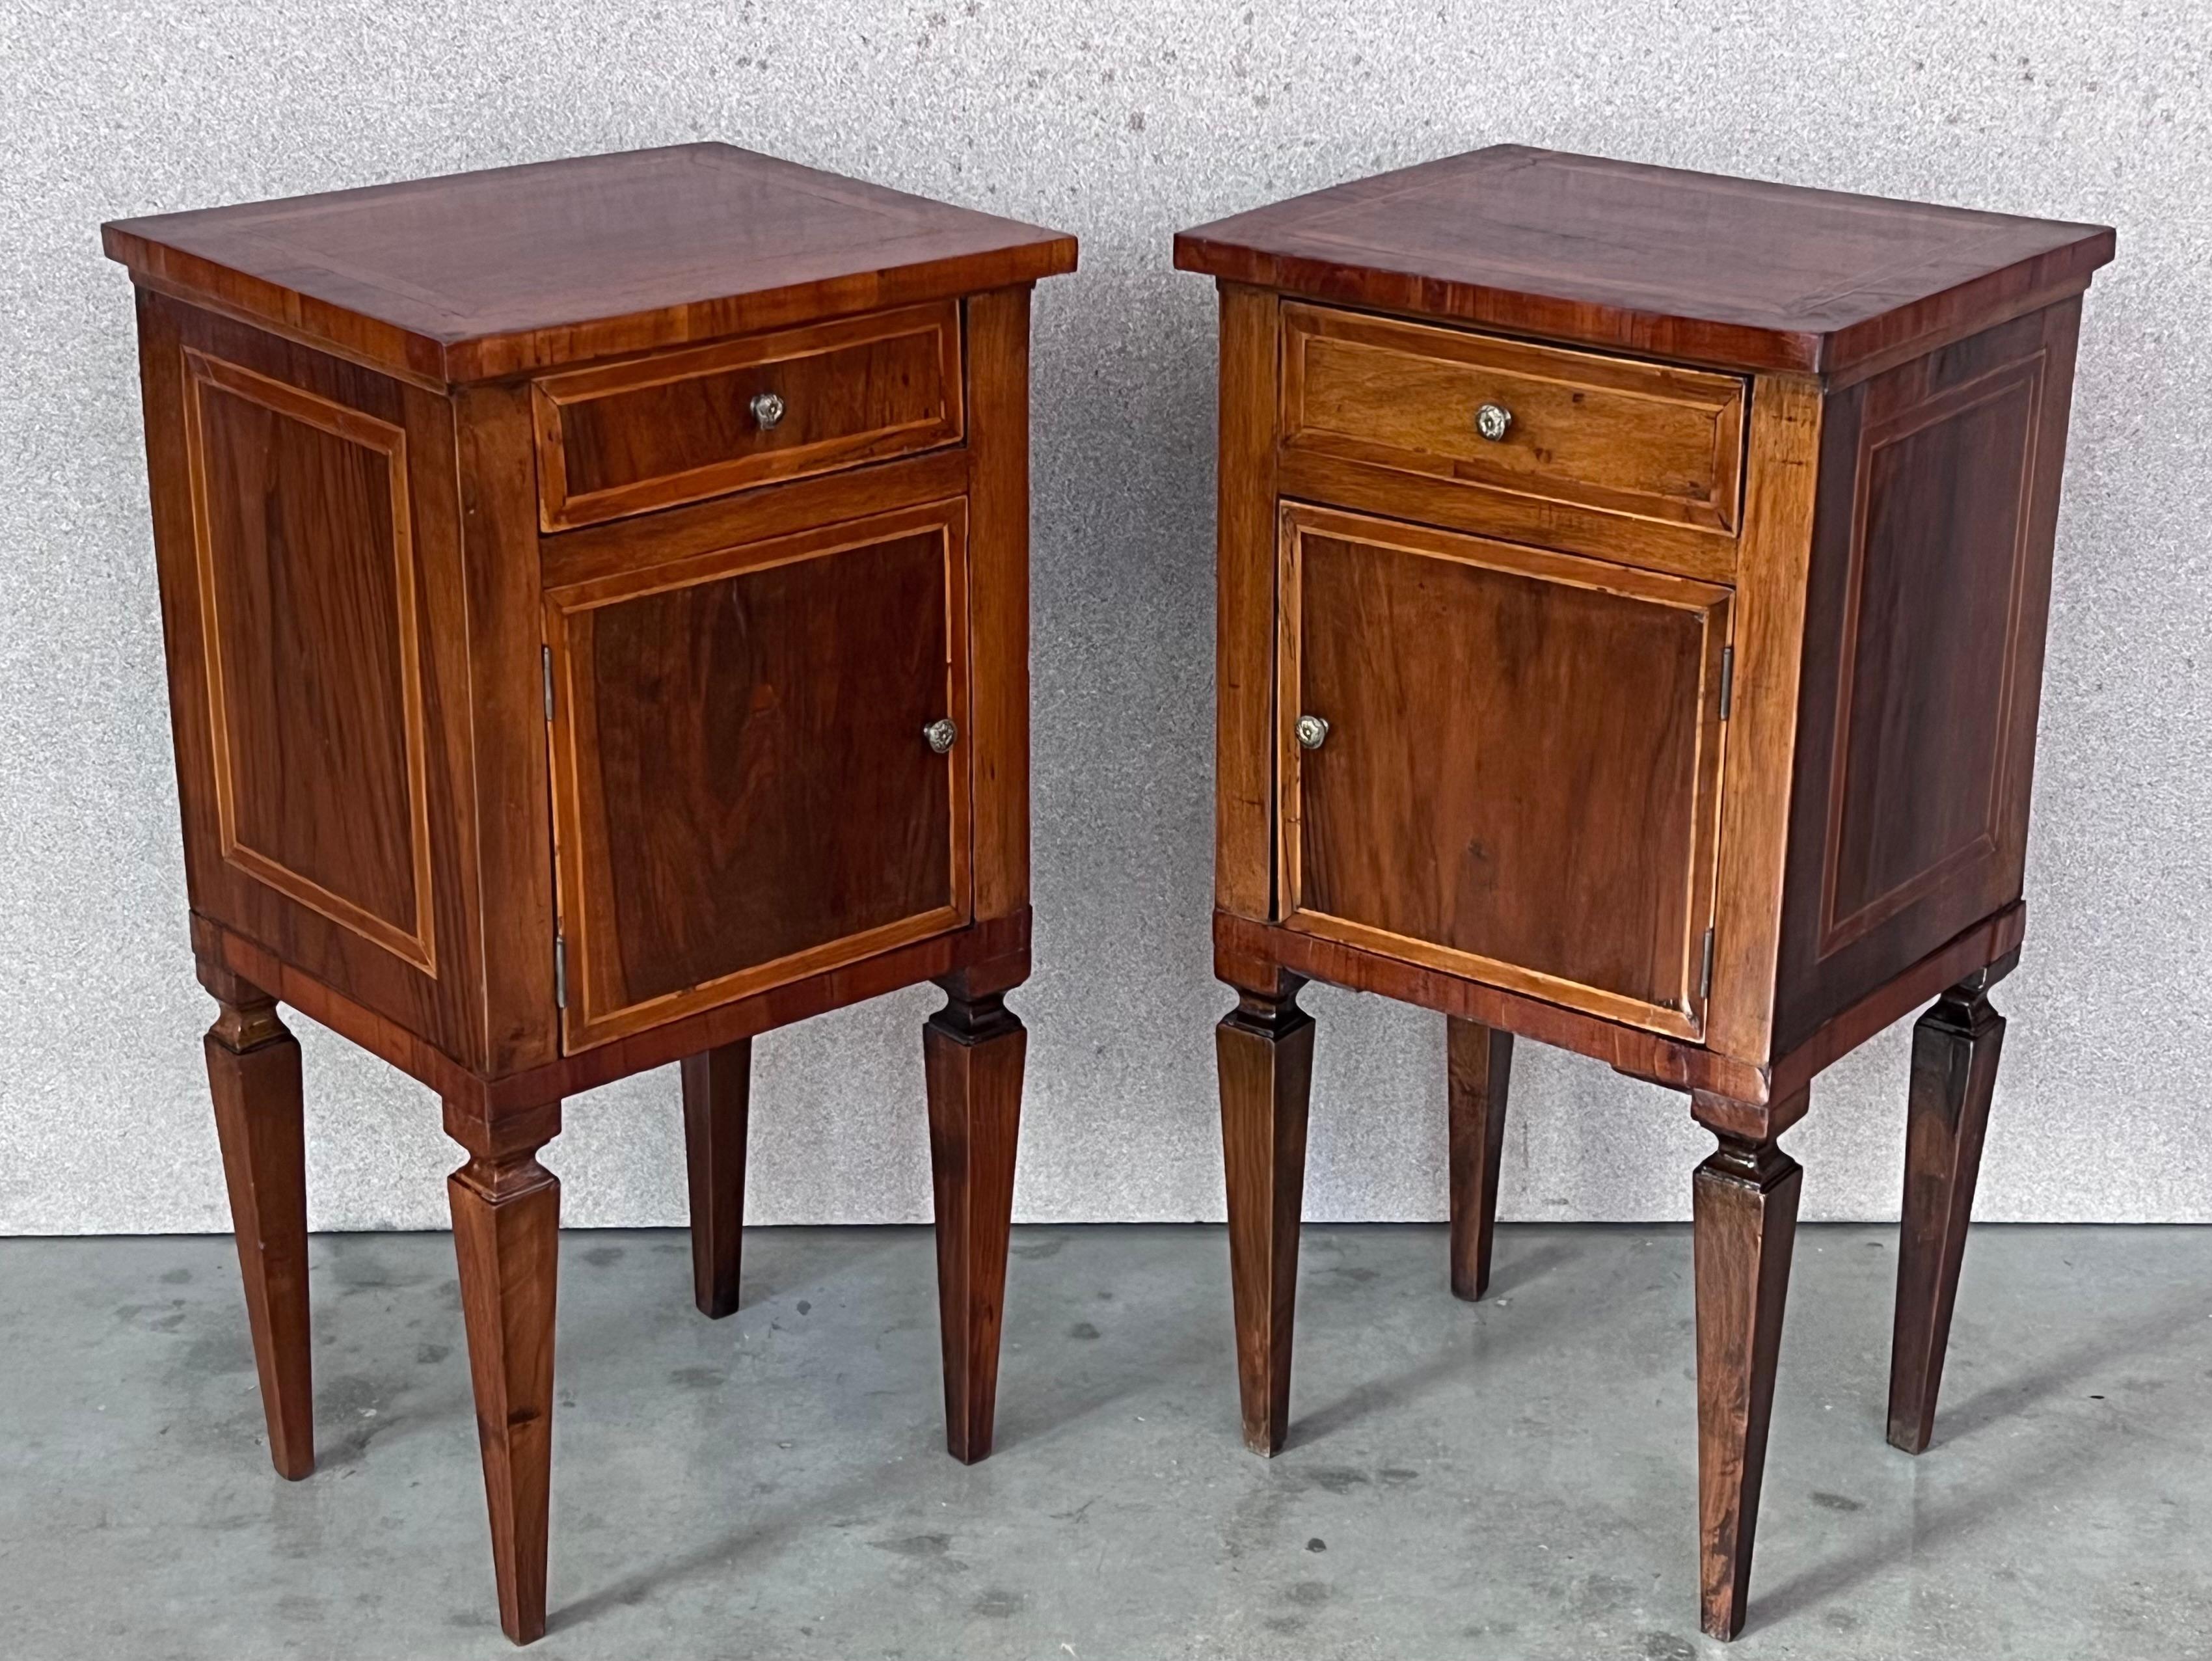 20th Century French, Antique Bedside Cabinet, Marquetry-Top Nightstand, circa 1890